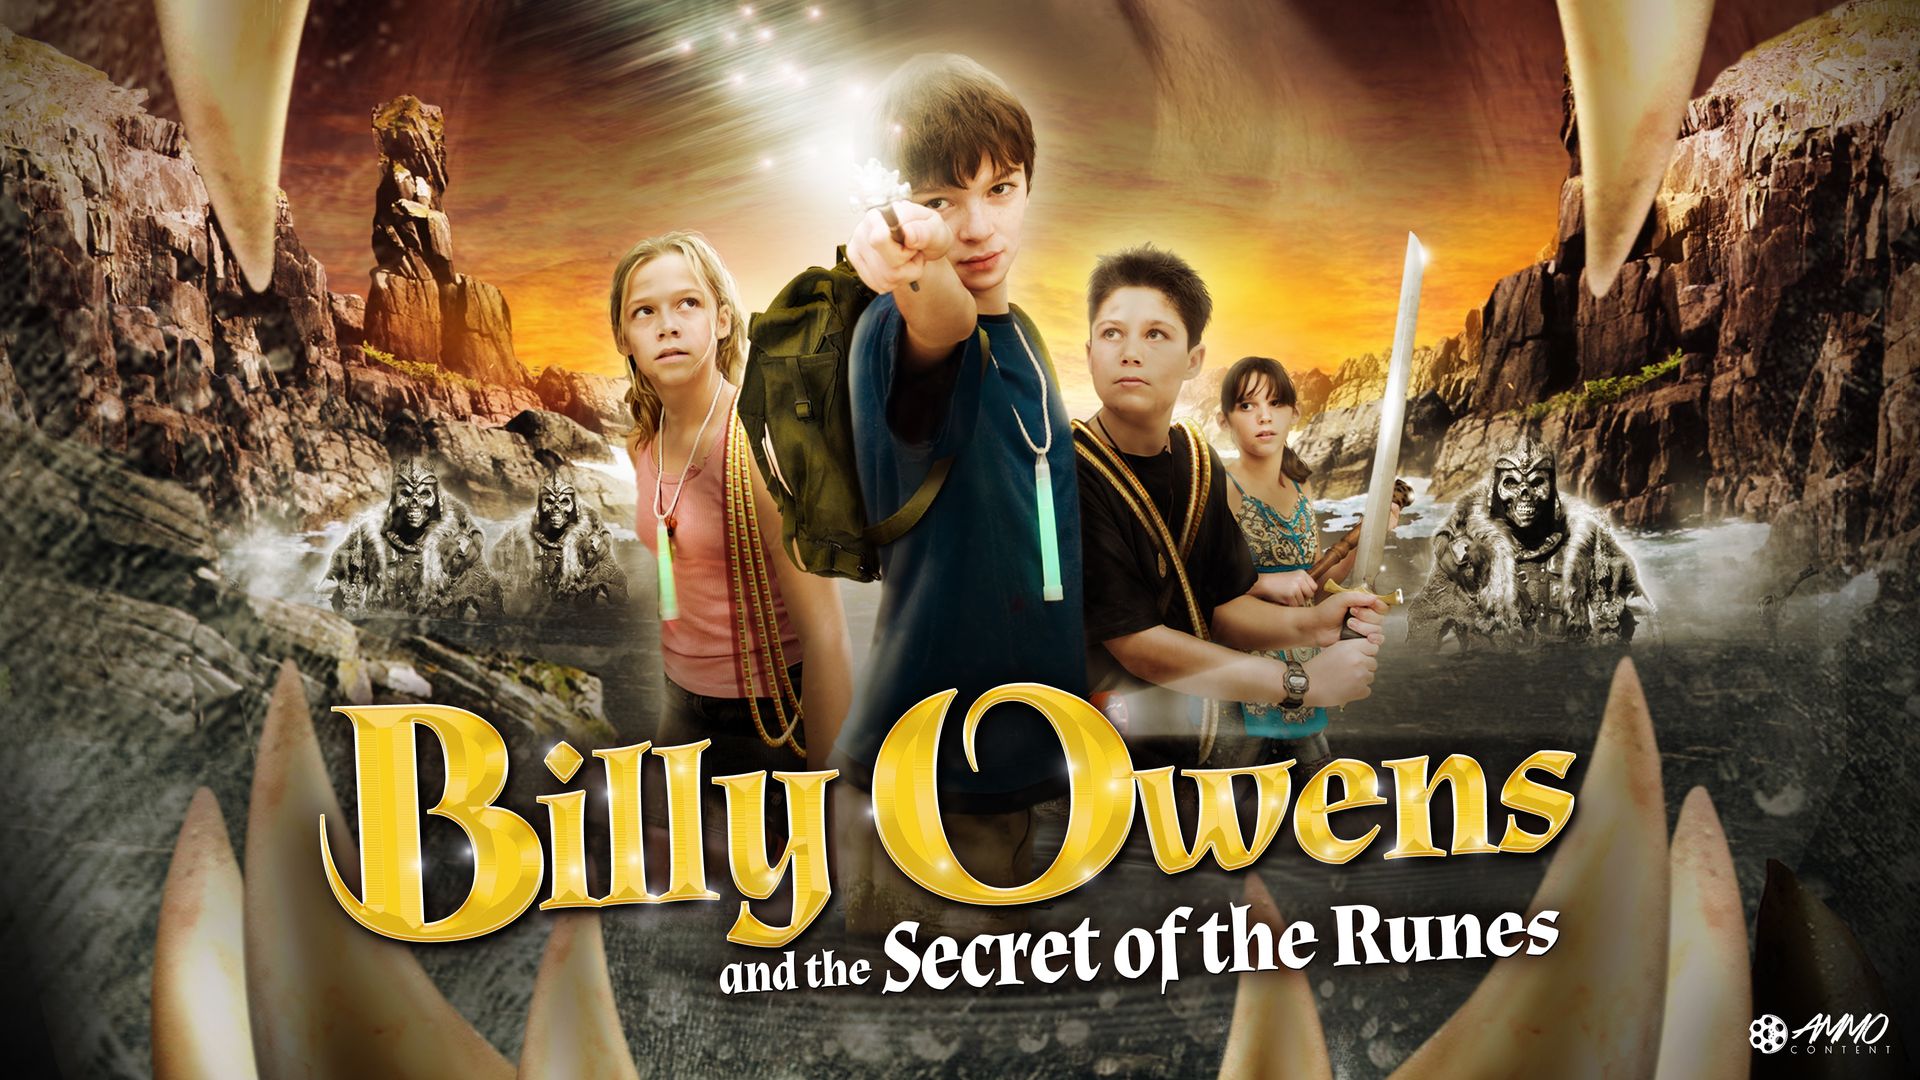 Billy Owens and the Secret of the Runes Backdrop